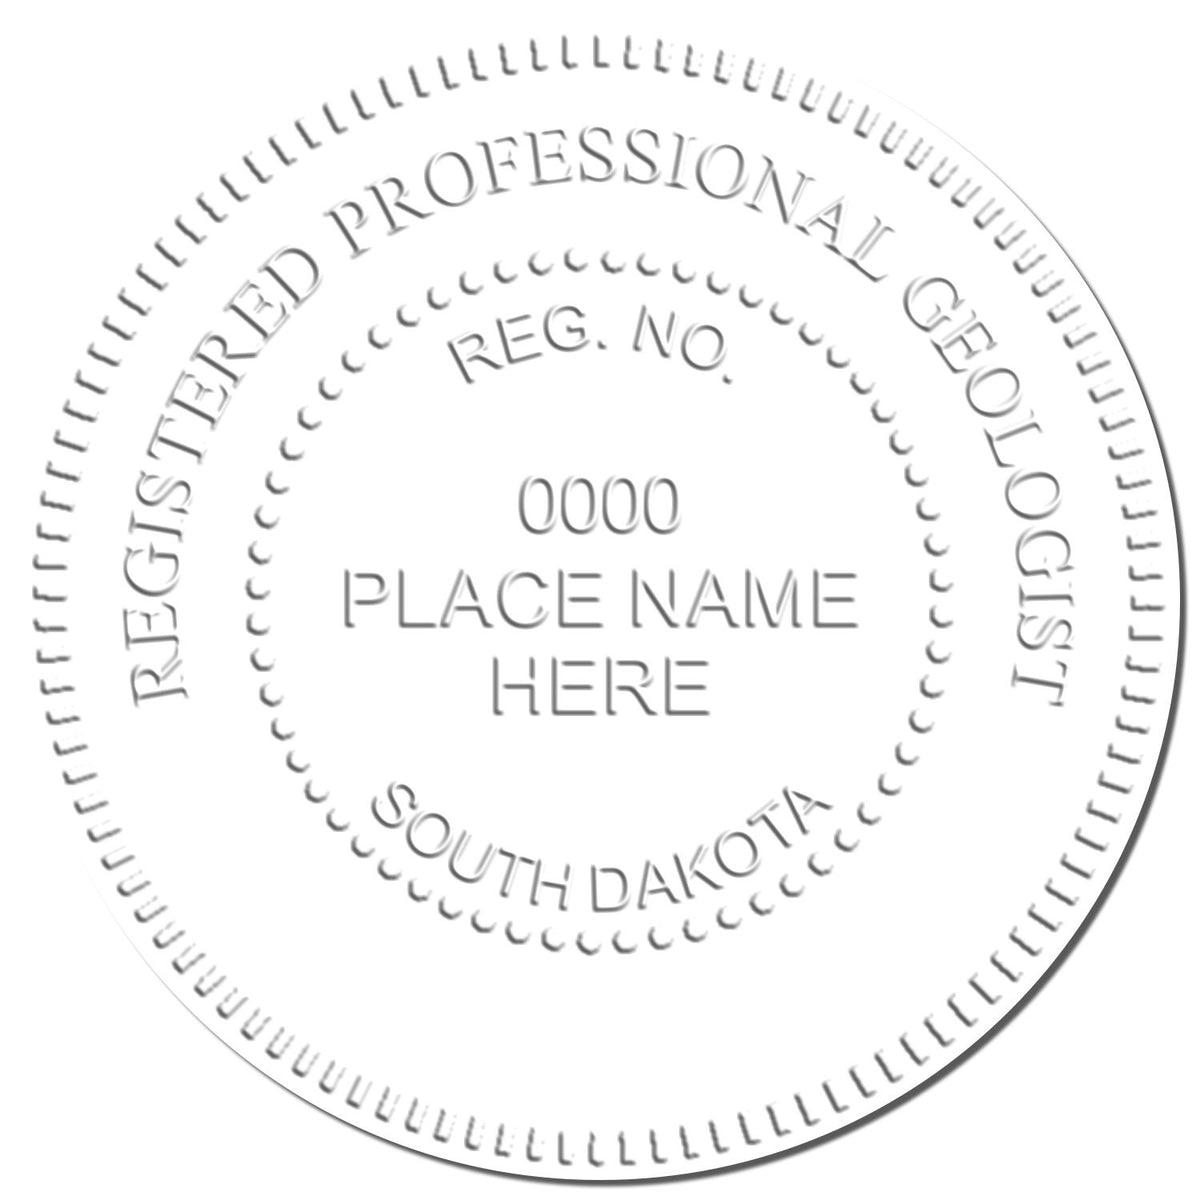 This paper is stamped with a sample imprint of the Handheld South Dakota Professional Geologist Embosser, signifying its quality and reliability.